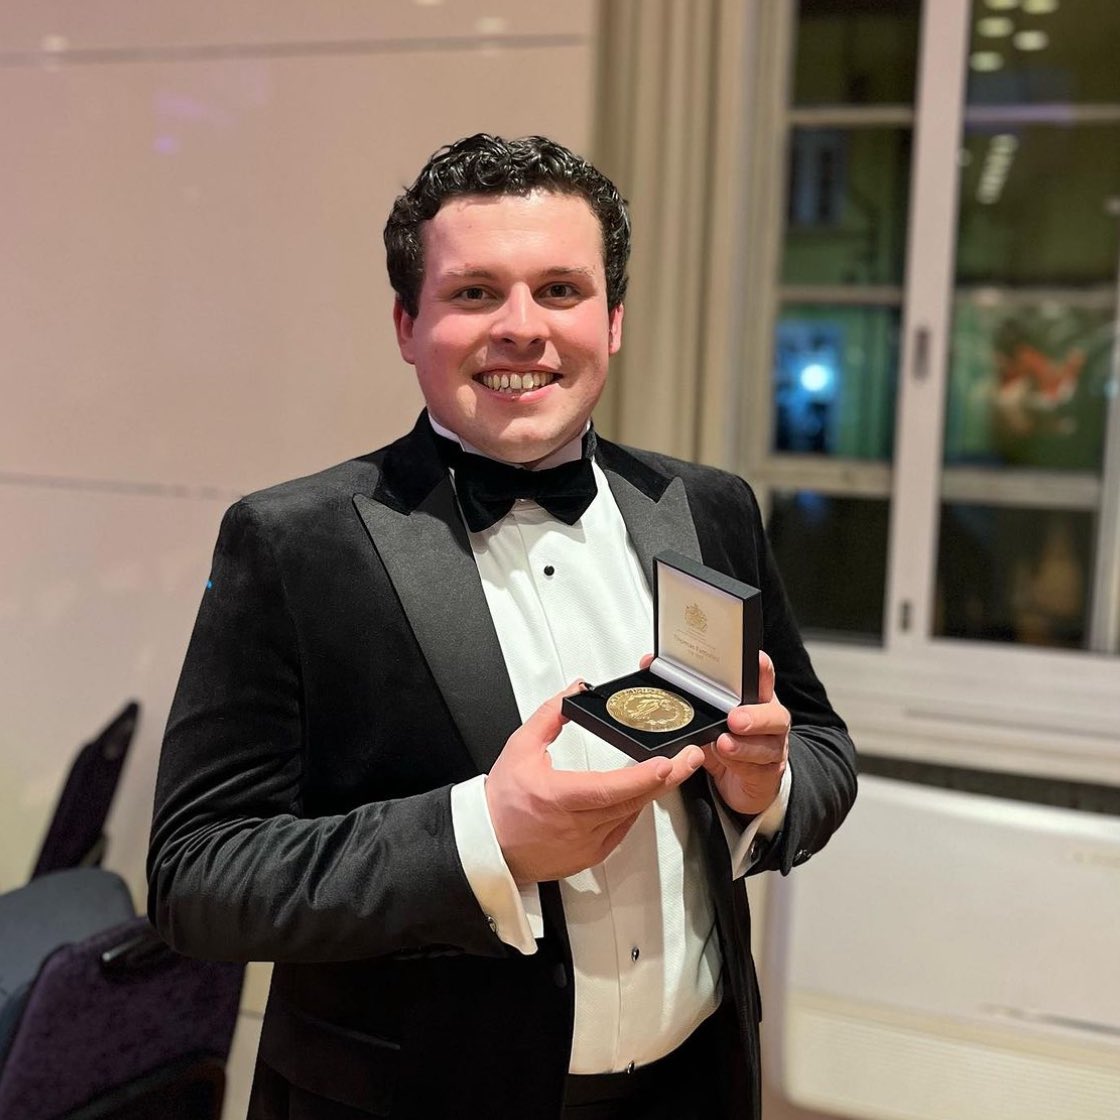 Chuffed to bits for my young student @DafJones_Tenor who won both the @ROSLARTS singing final and Lies Askonas prize @RCMLondon this week… he’s working incredibly hard and is a lovely chap to boot!